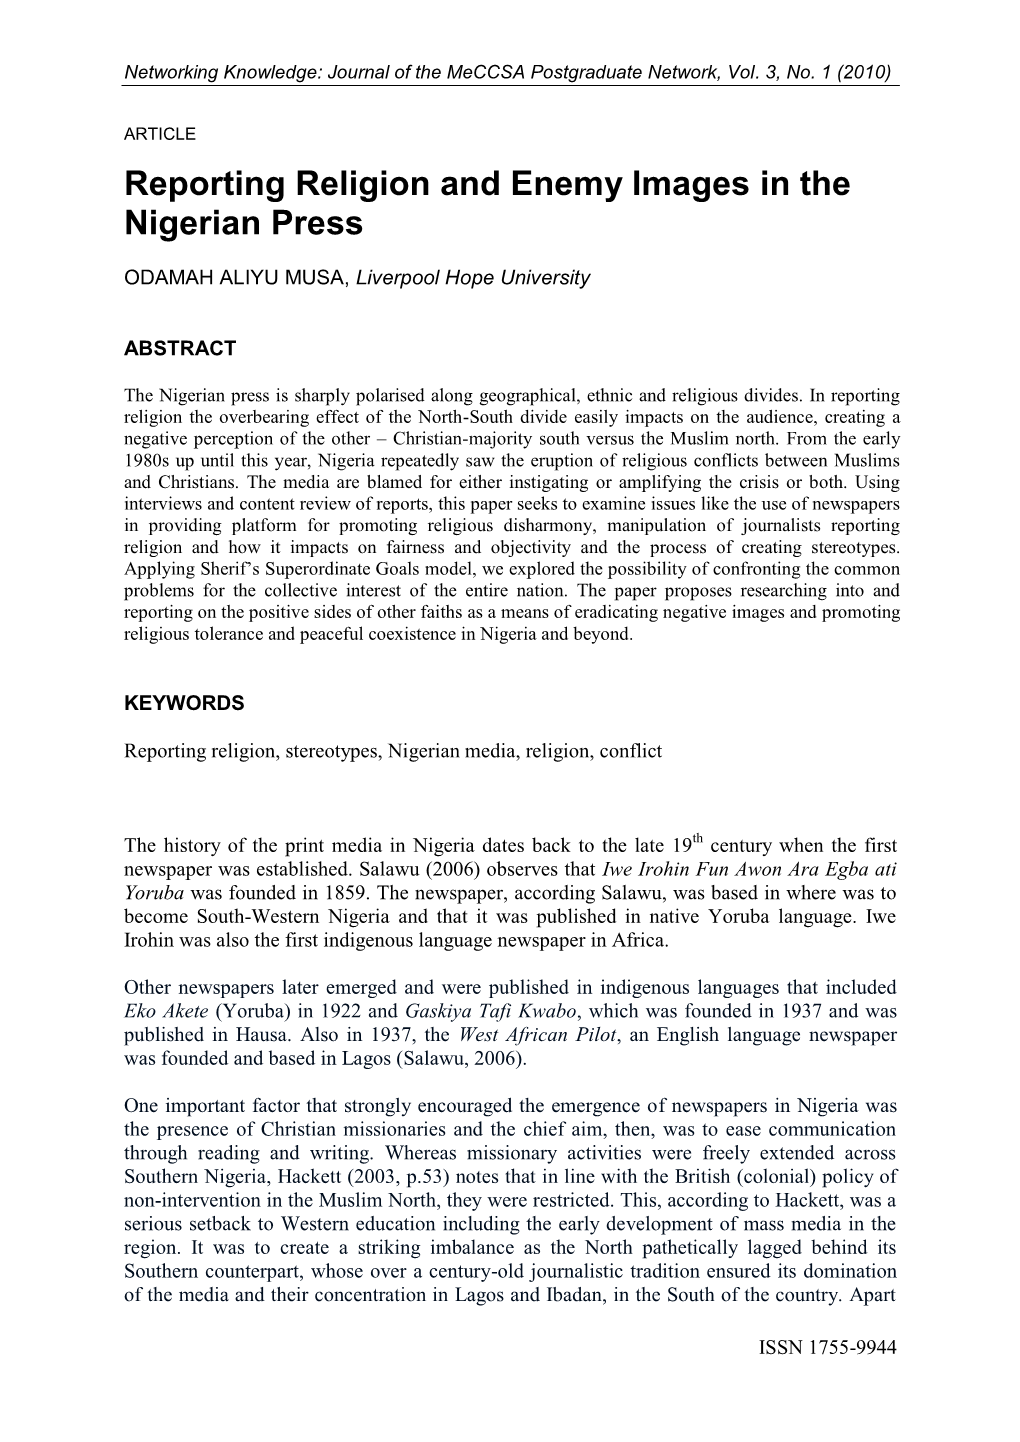 Reporting Religion and Enemy Images in the Nigerian Press